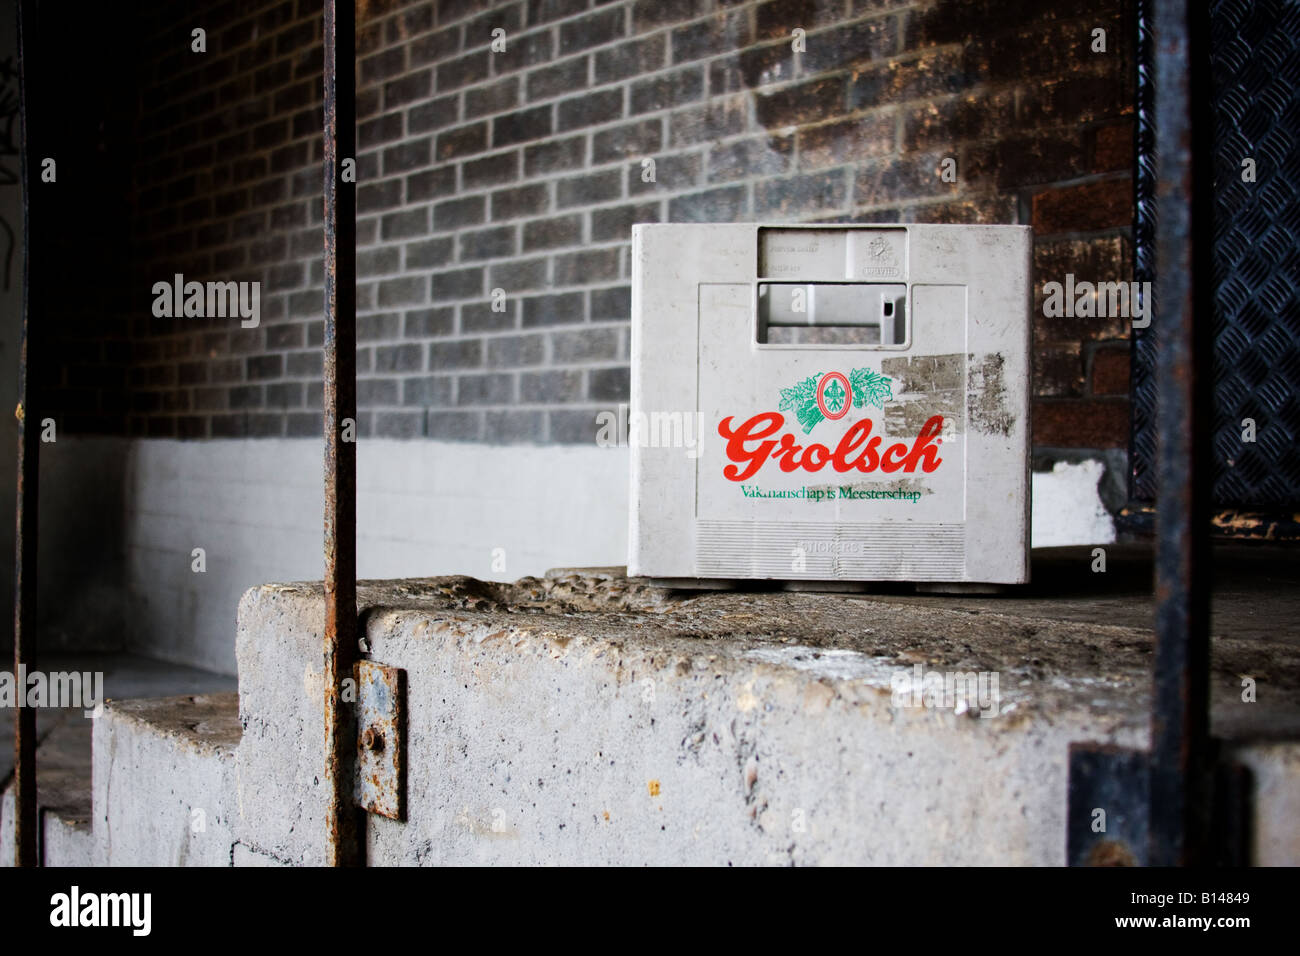 A Grolsch lager beer crate abandoned on an urban inner-city step. Stock Photo